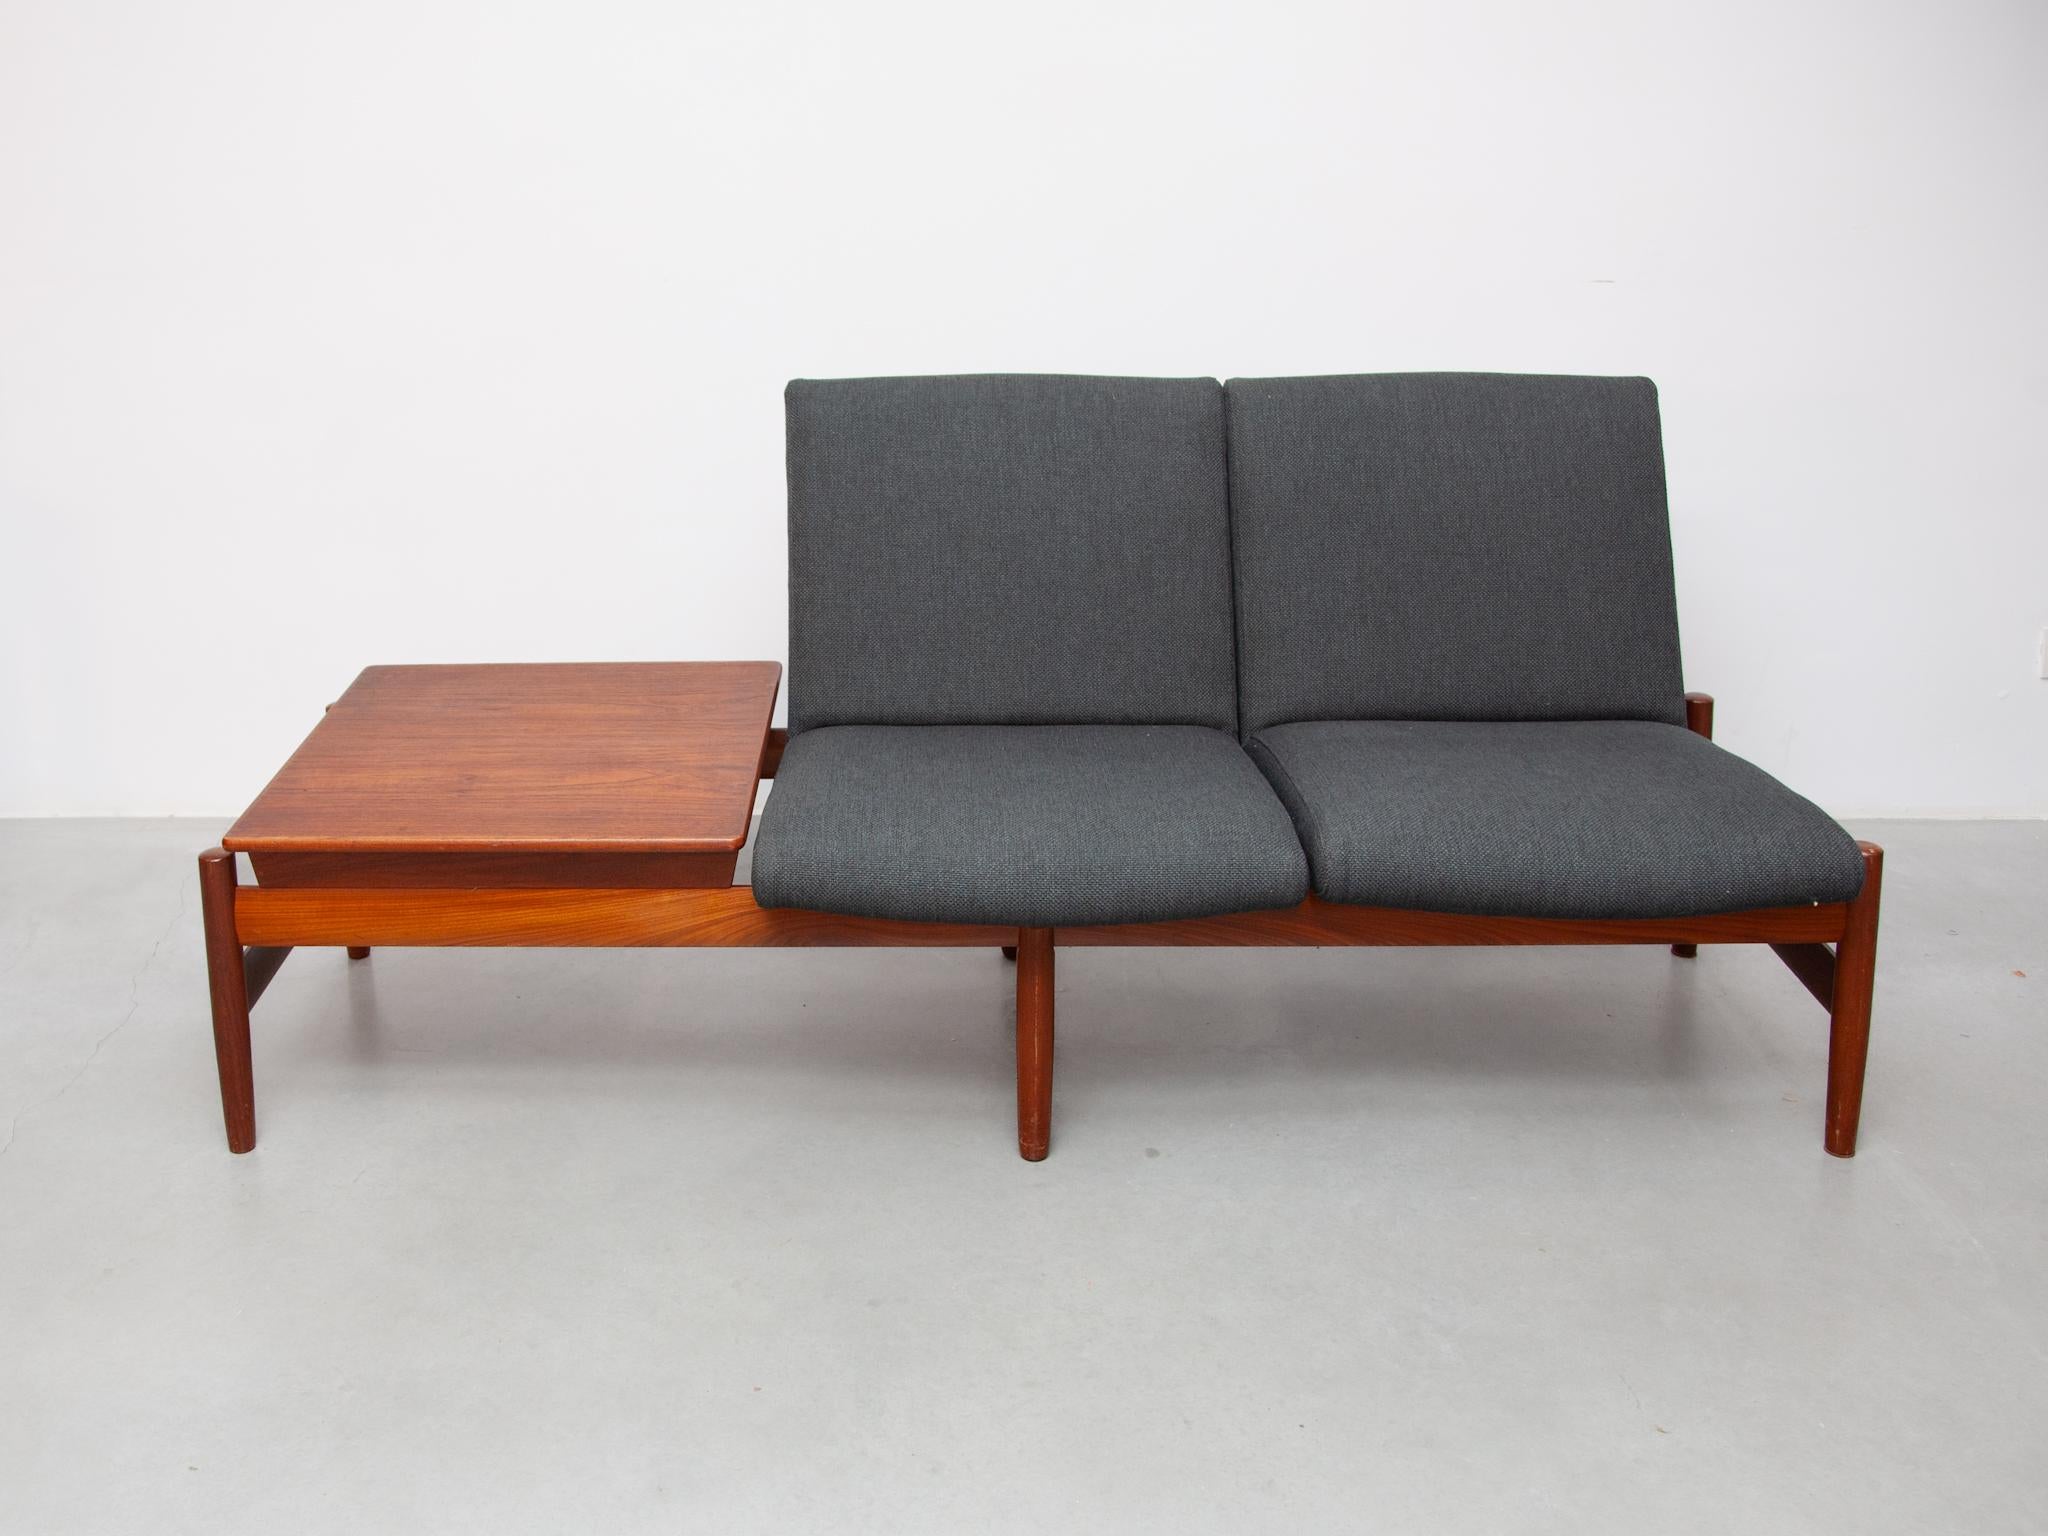 Teak modular sofa from the 1960s by Gunnar Sørlie for Karl Sørlie & Sønner, Sarpsborg. Saga model with high quality solid teak frame. The sofa has been reupholstered. The arrangement of the seats and the table top can be changed in various